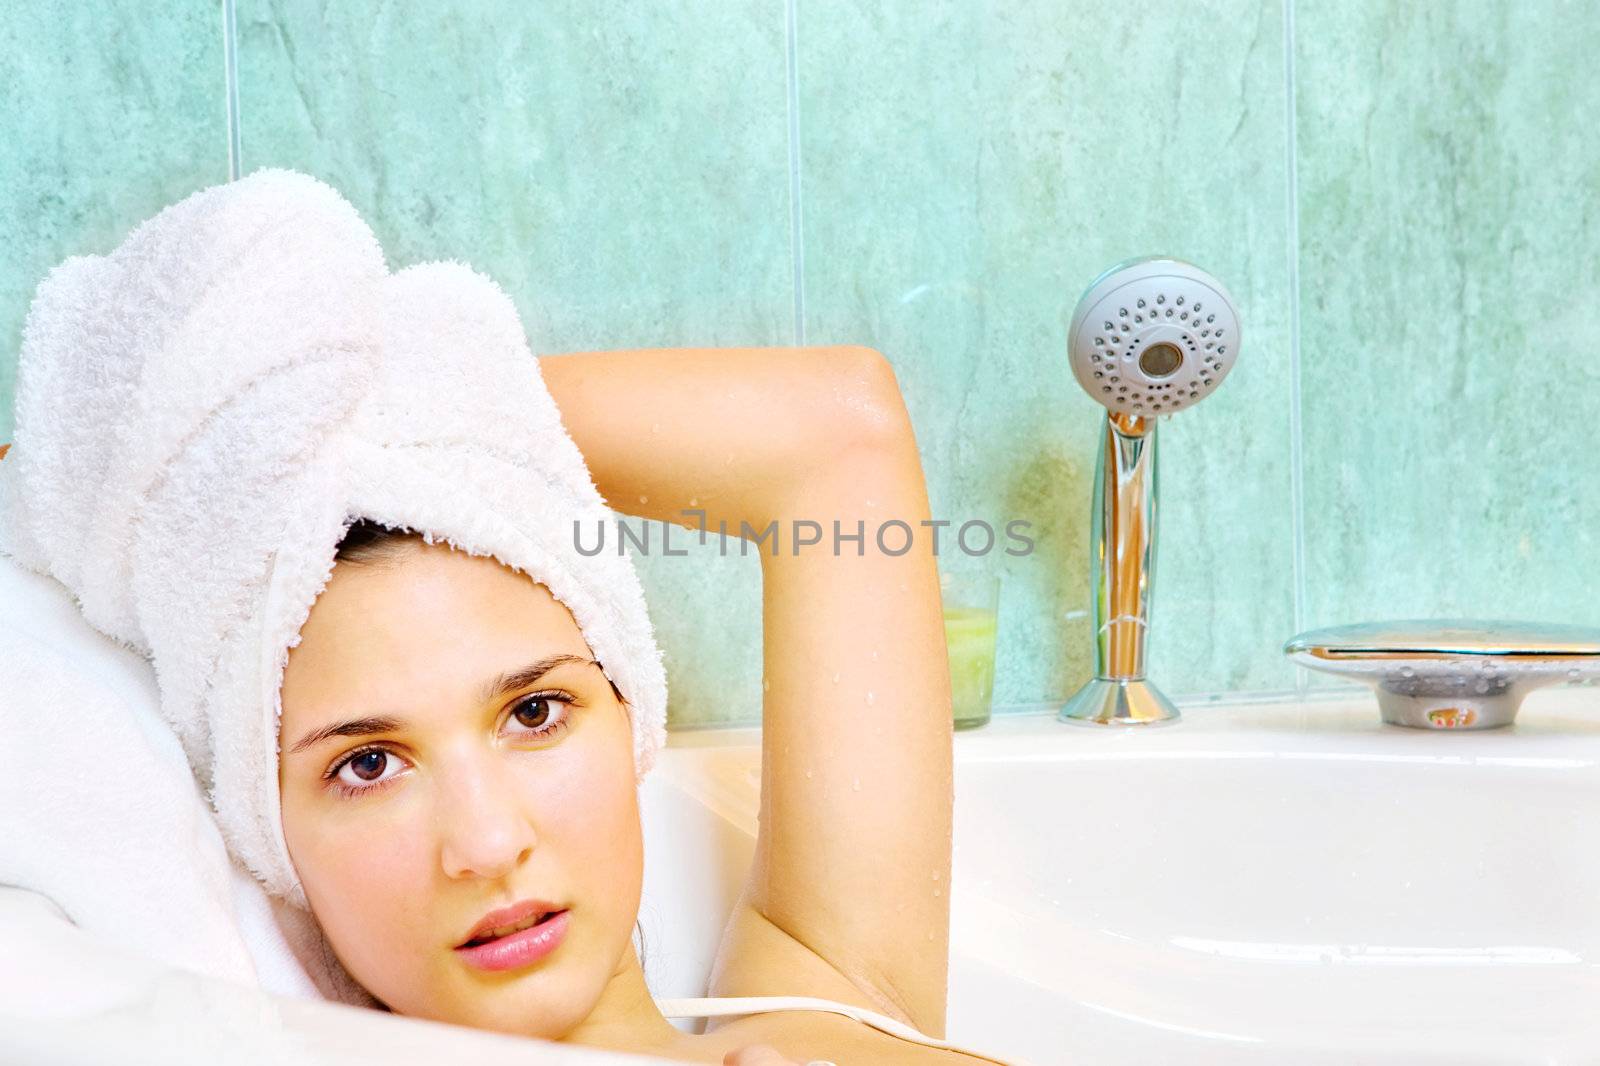 woman with towel on head in the bathtub by imarin